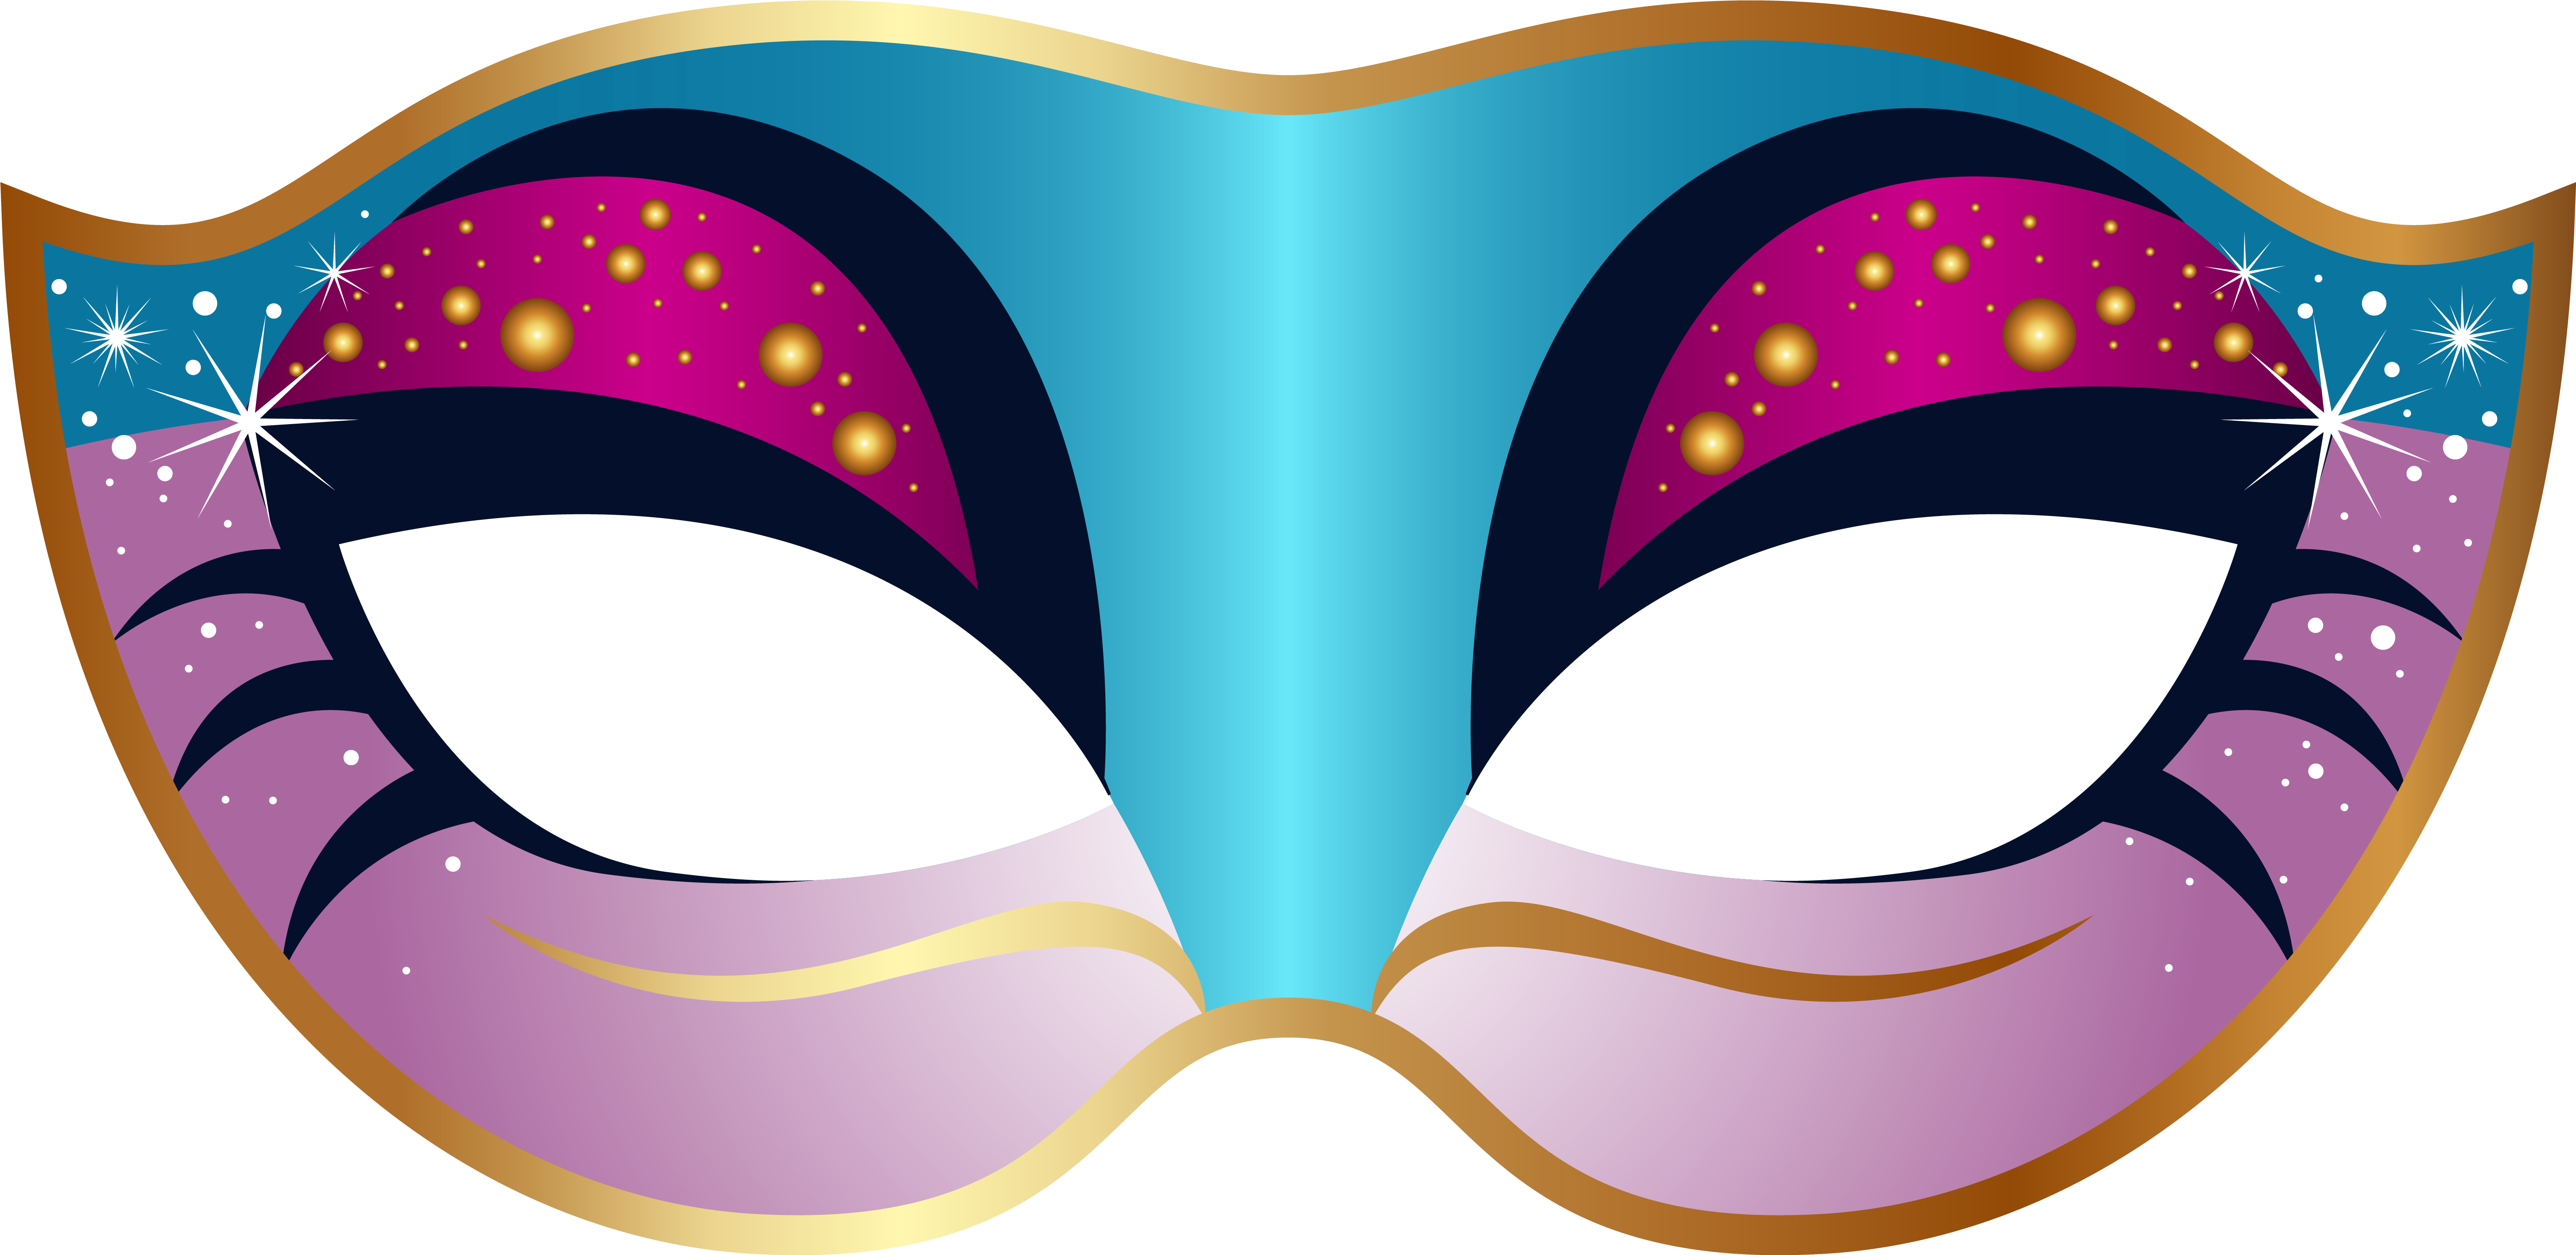 Blue And Pink Carnival Mask Clip Art Image - Mardi Gras Mask Mask Cutout Festival Mask Carnival (6230x3108)